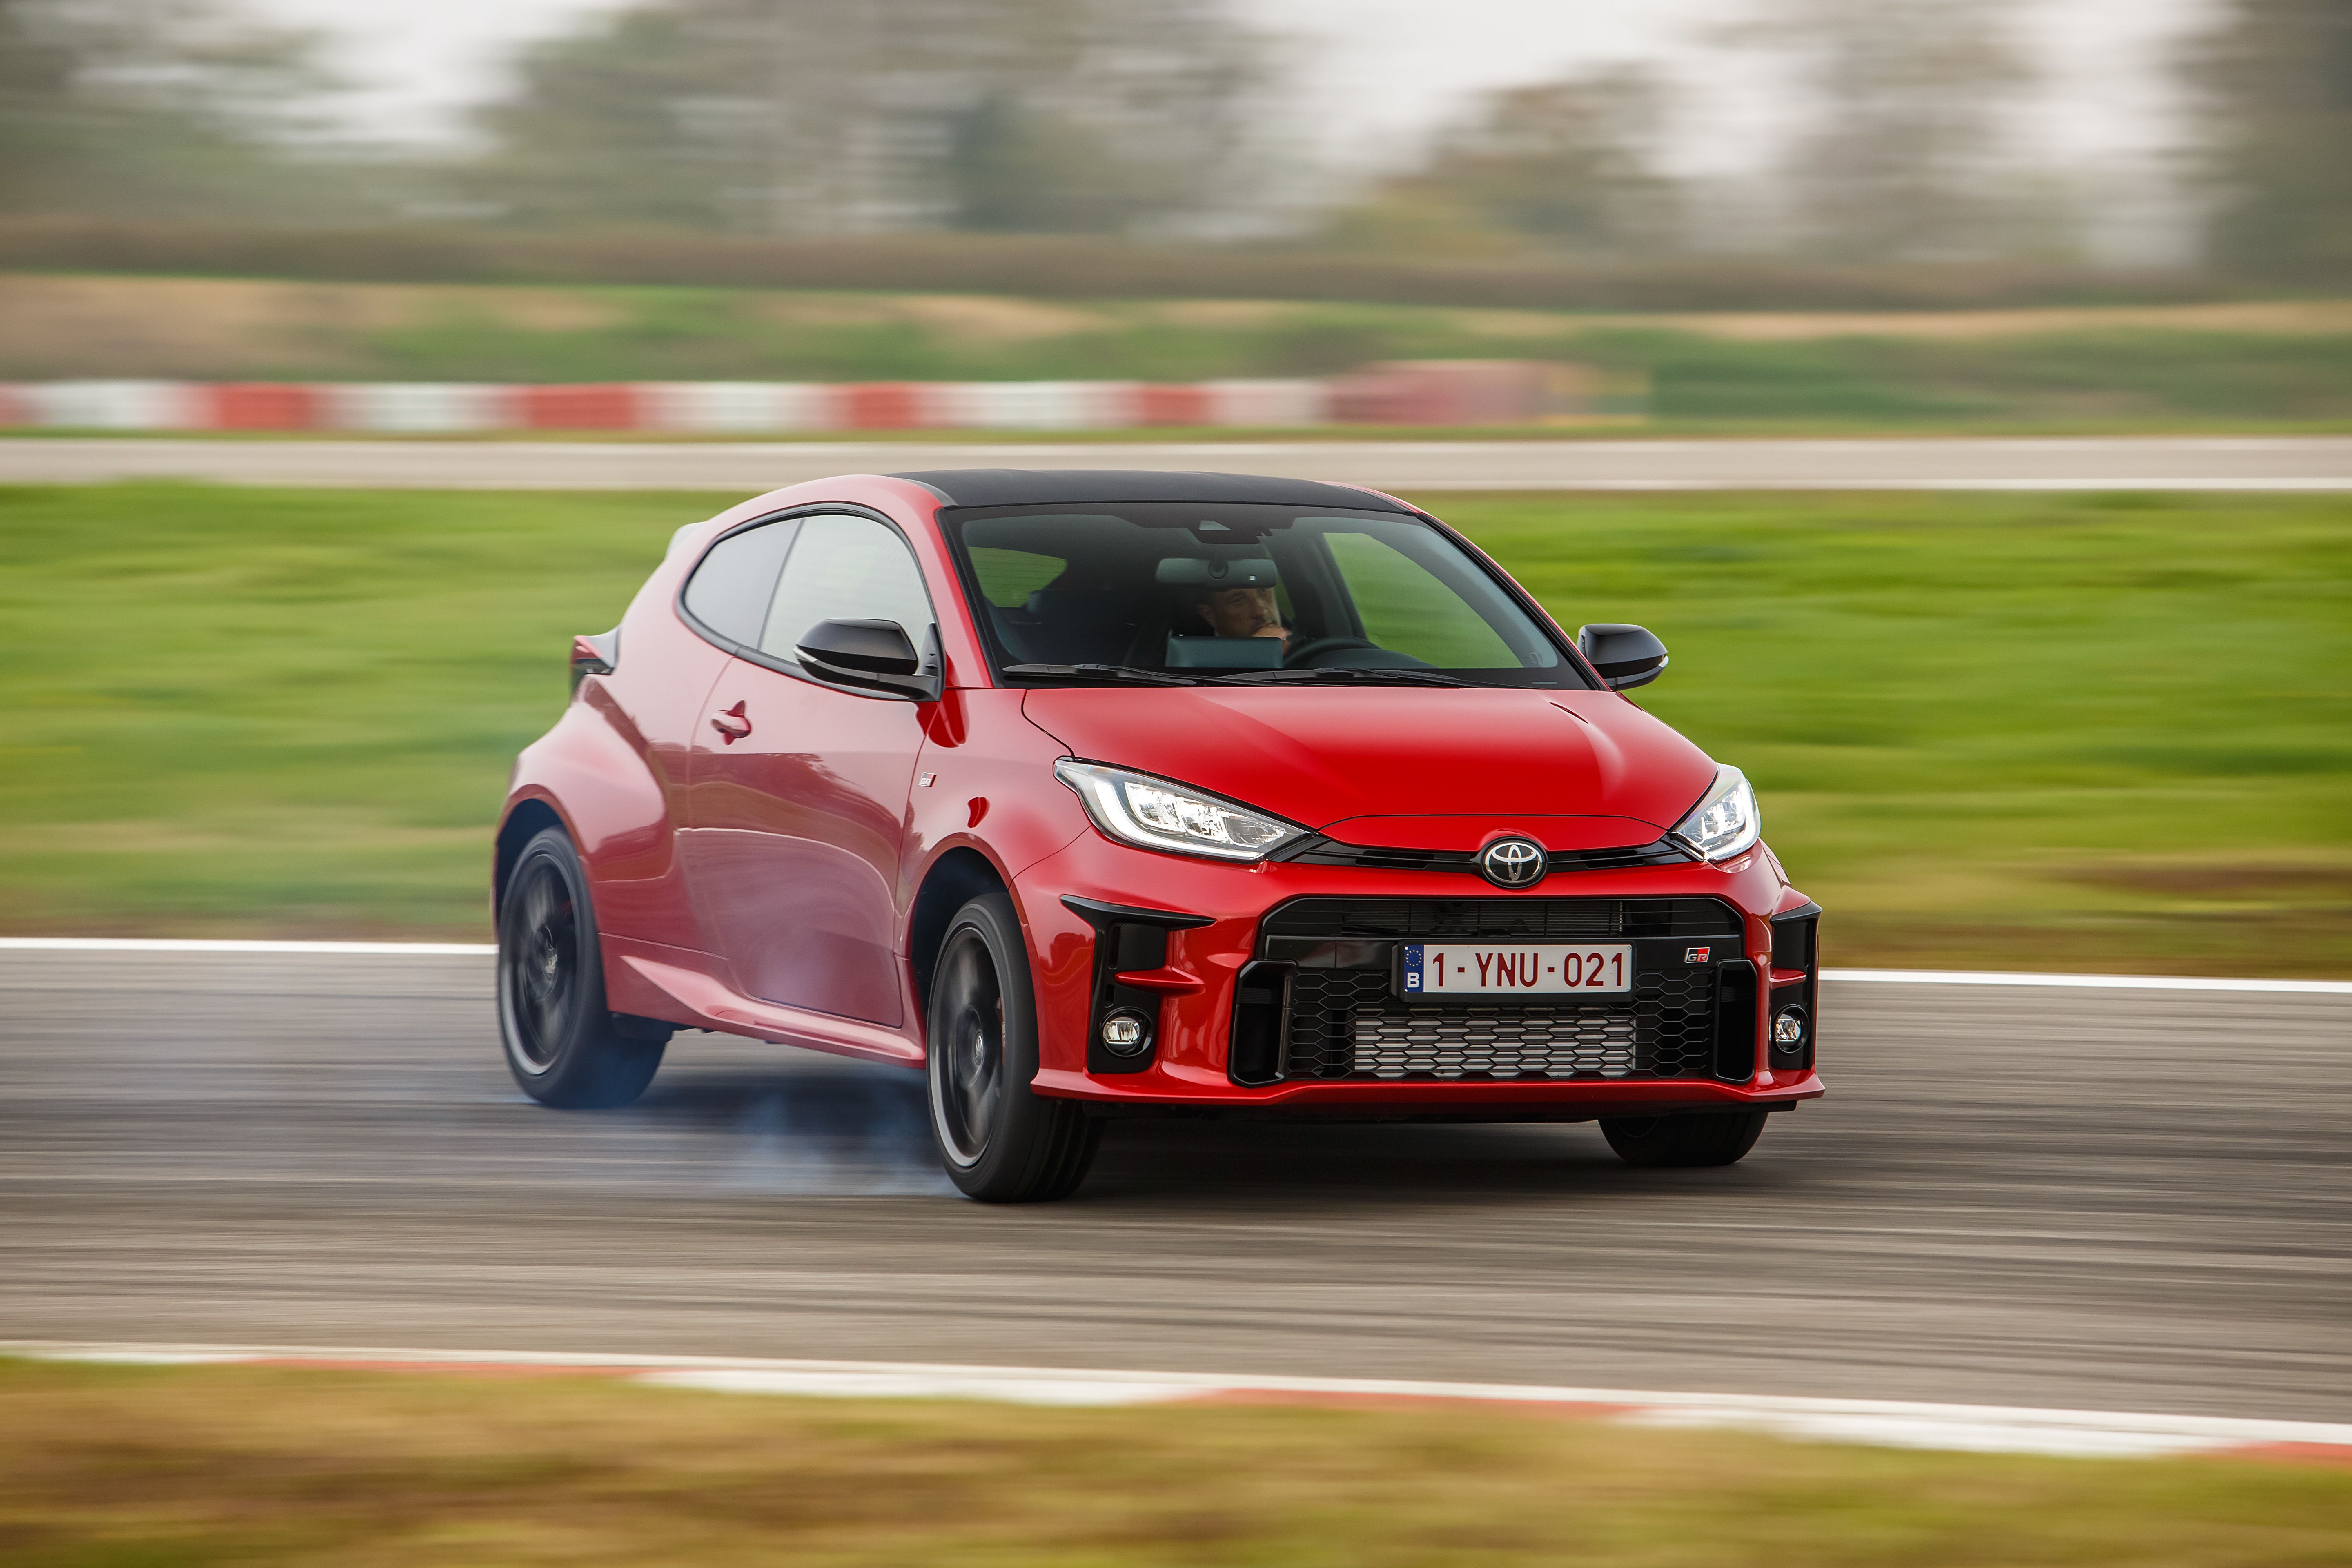 2021 Toyota Yaris GR Puts the Hot Back in Hot Hatch